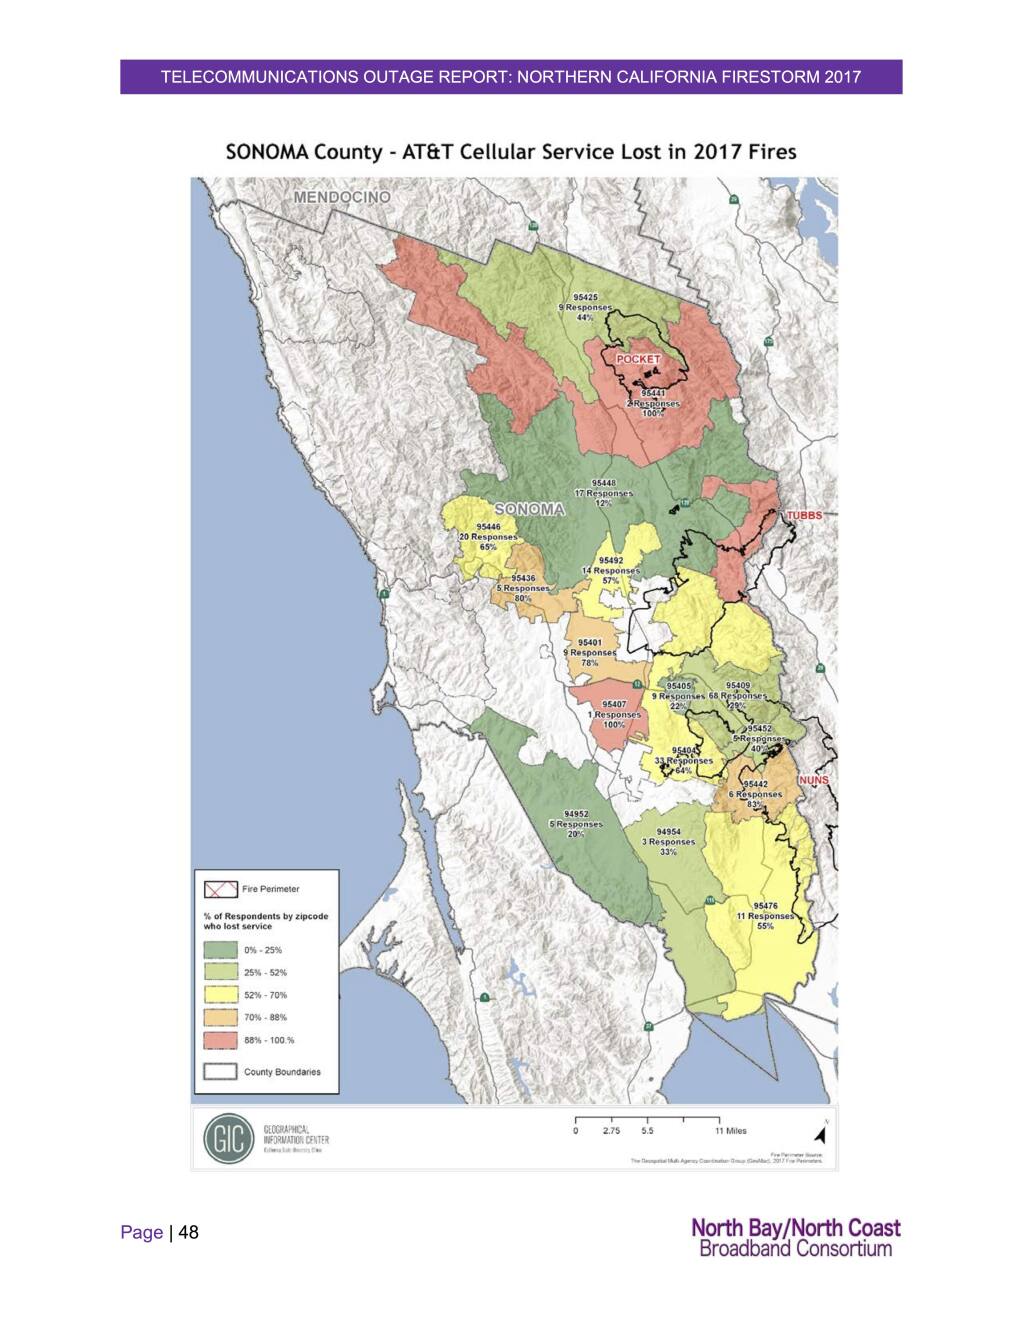 This map of Sonoma County shows the percentage of respondents by ZIP code who reported losing AT&T cellphone service during the October 2017 wildfires. (North Bay/North Coast Broadband Consortium)